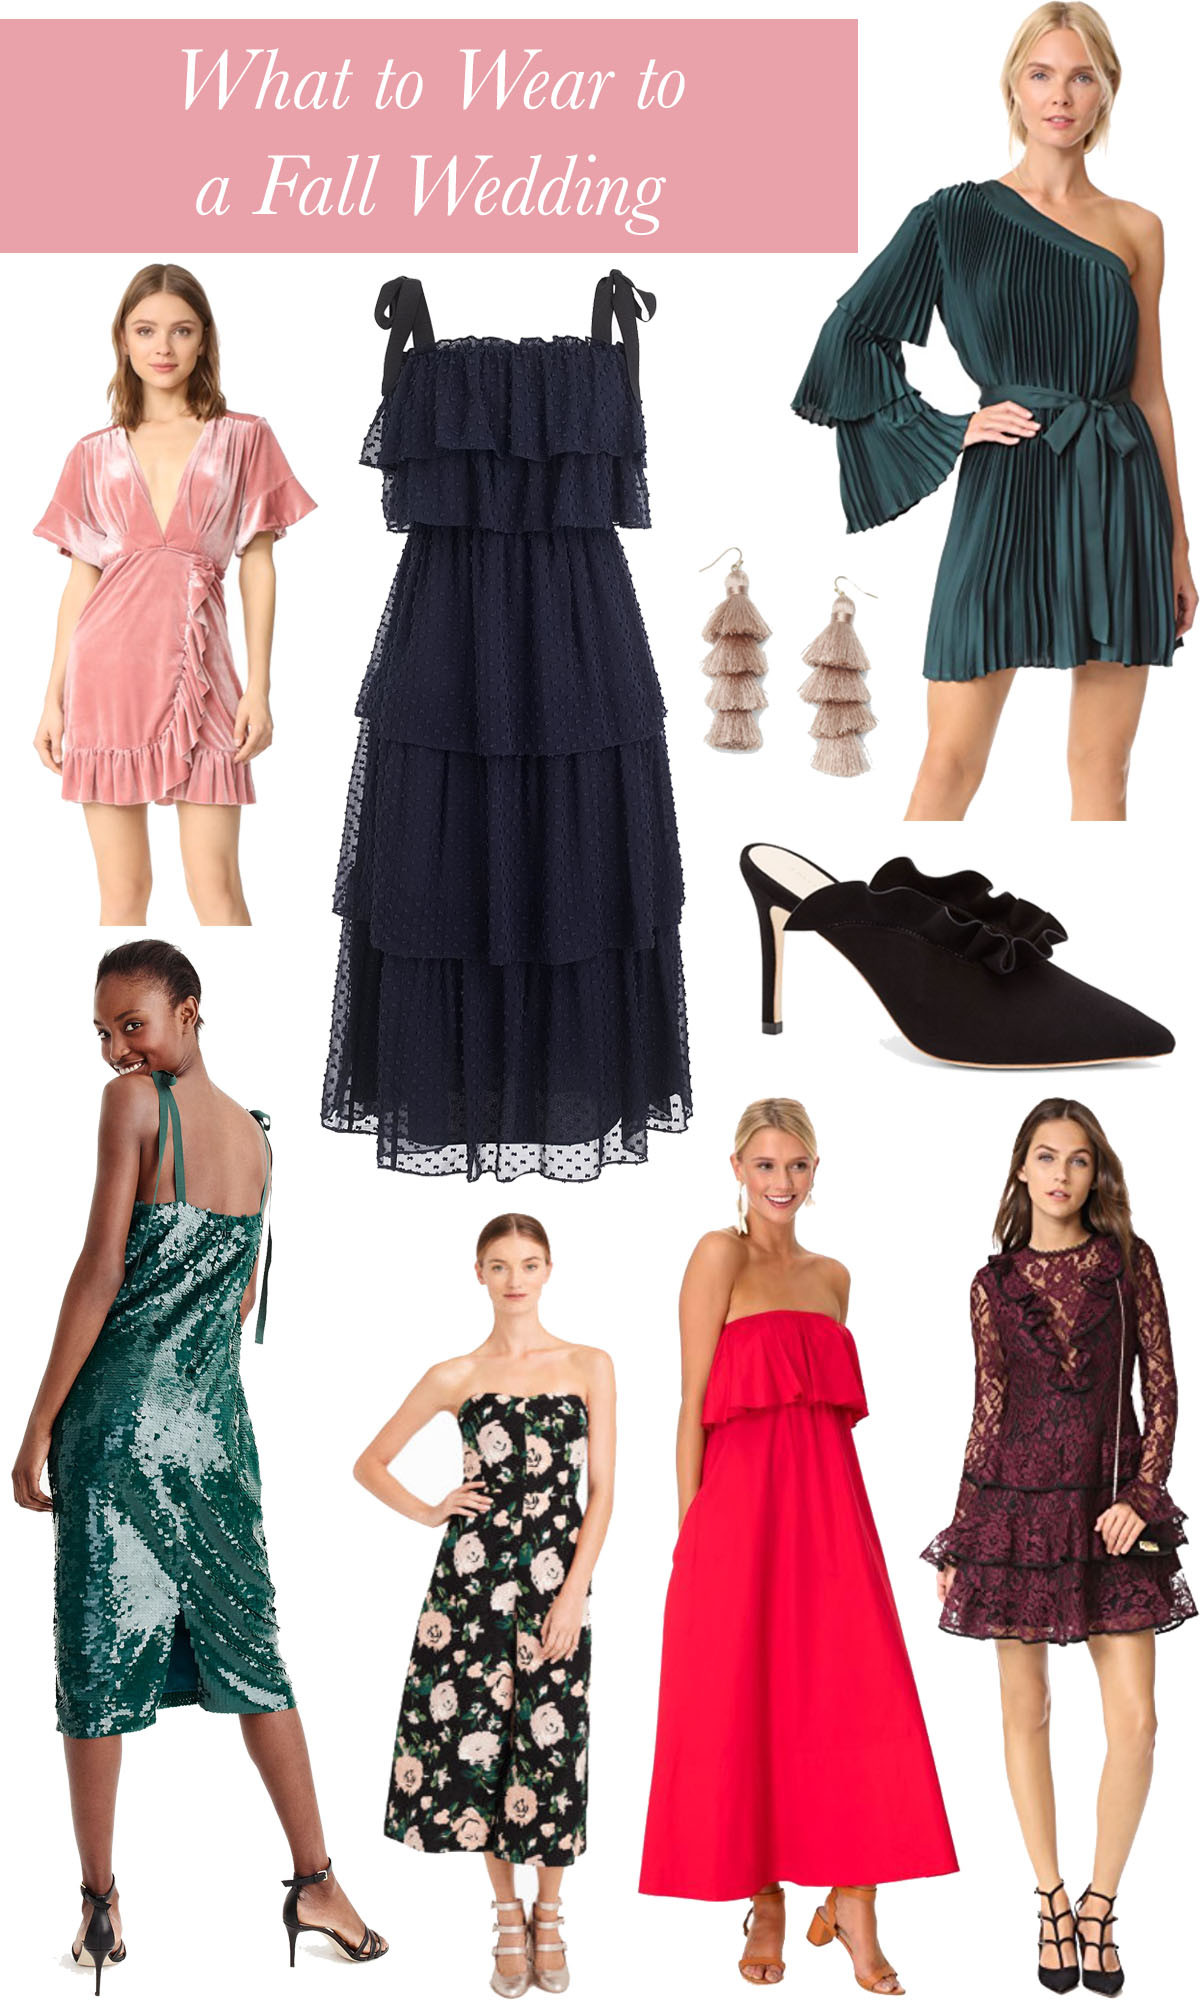 What Colors To Wear To A Wedding
 What to Wear to a Fall Wedding